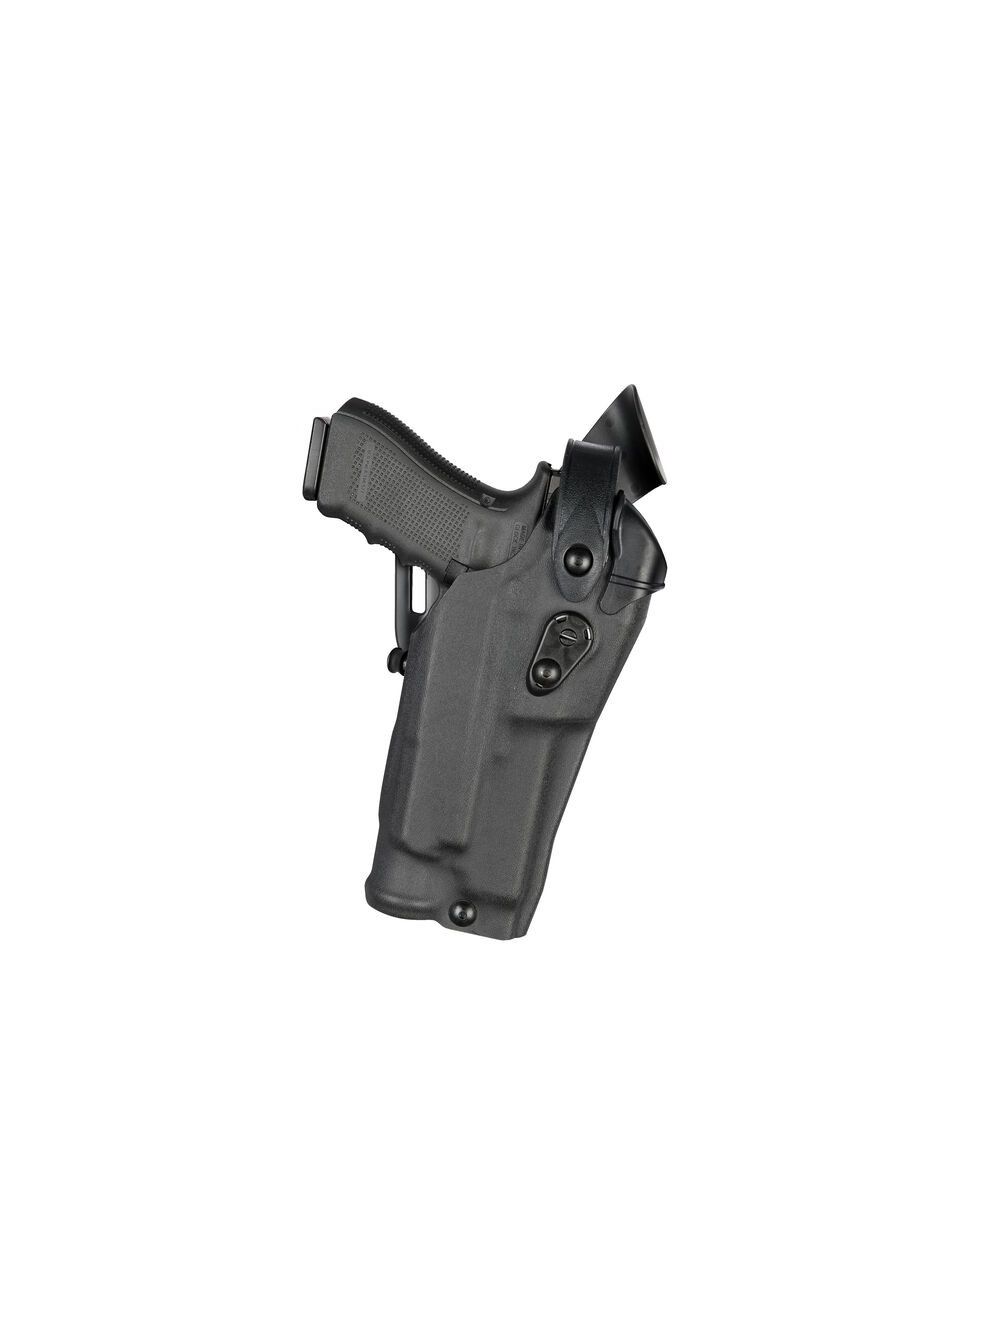 Model 6360RDS ALS/SLS Mid-Ride, Level III Retention Duty Holster for Smith & Wesson M&P 2.0 9 w/ Light